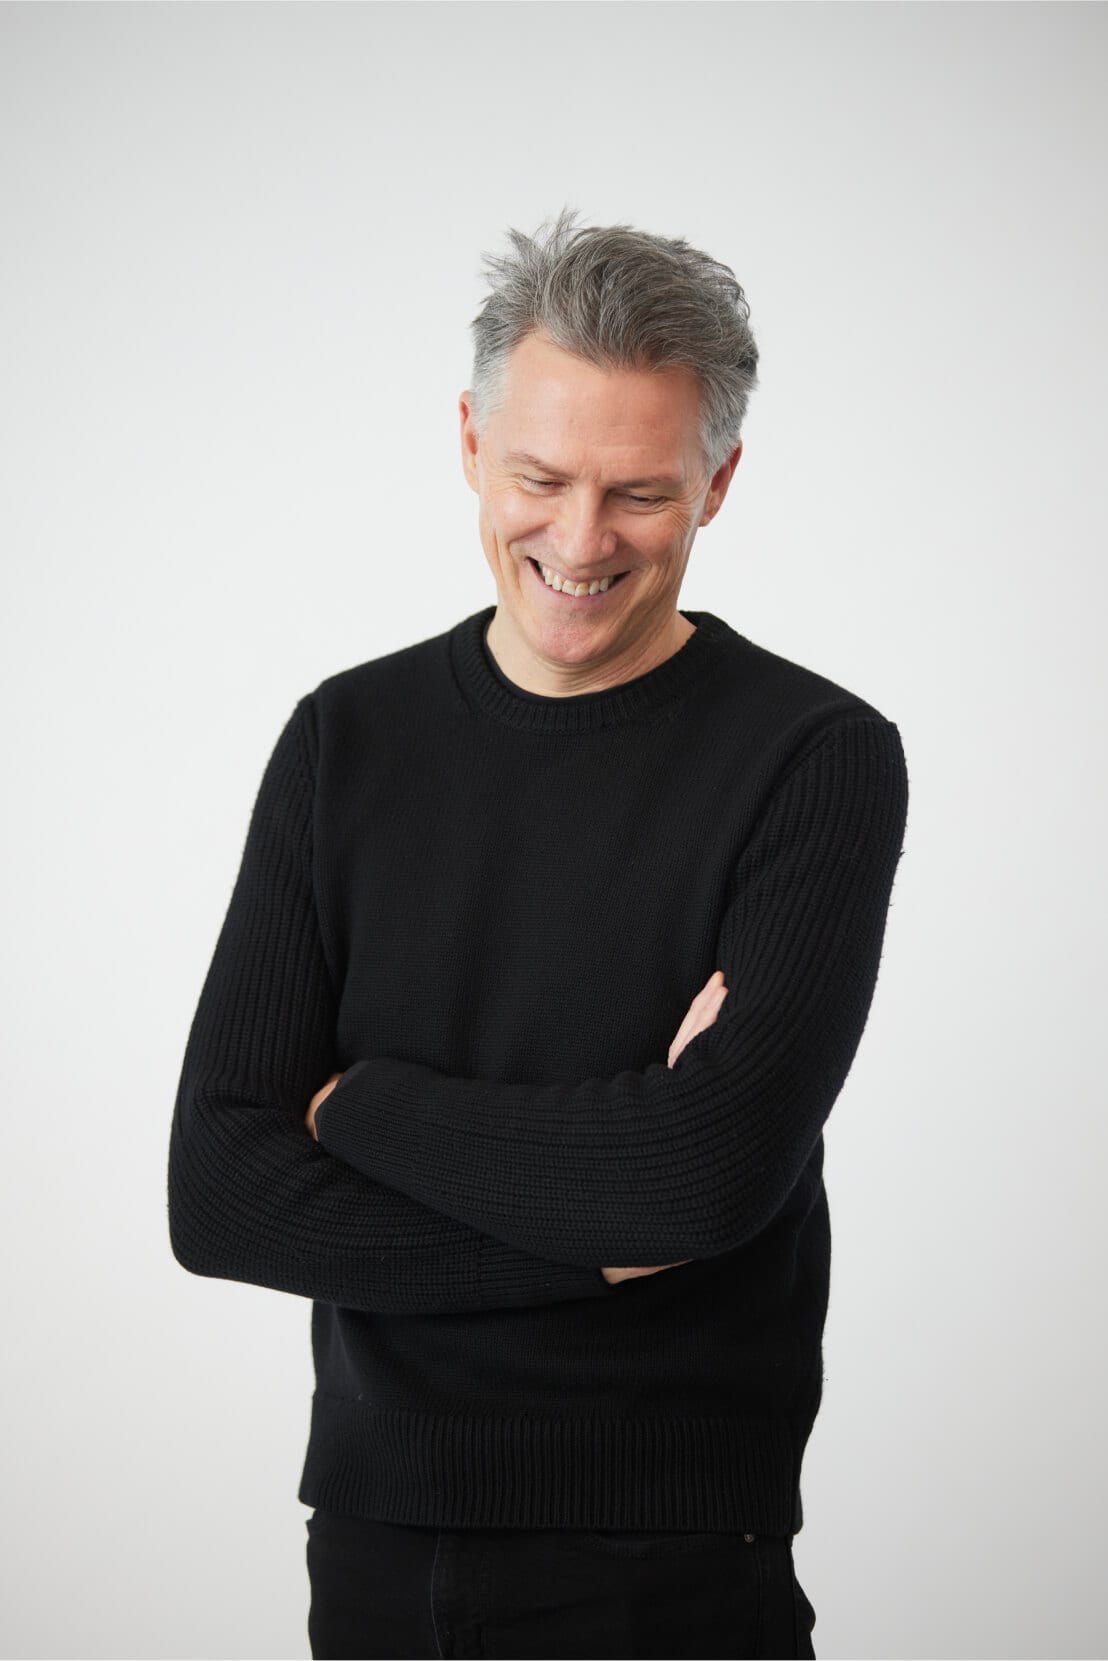 Full body shot of a cheerful person with crossed arms wearing a black sweater, looking down and smiling warmly